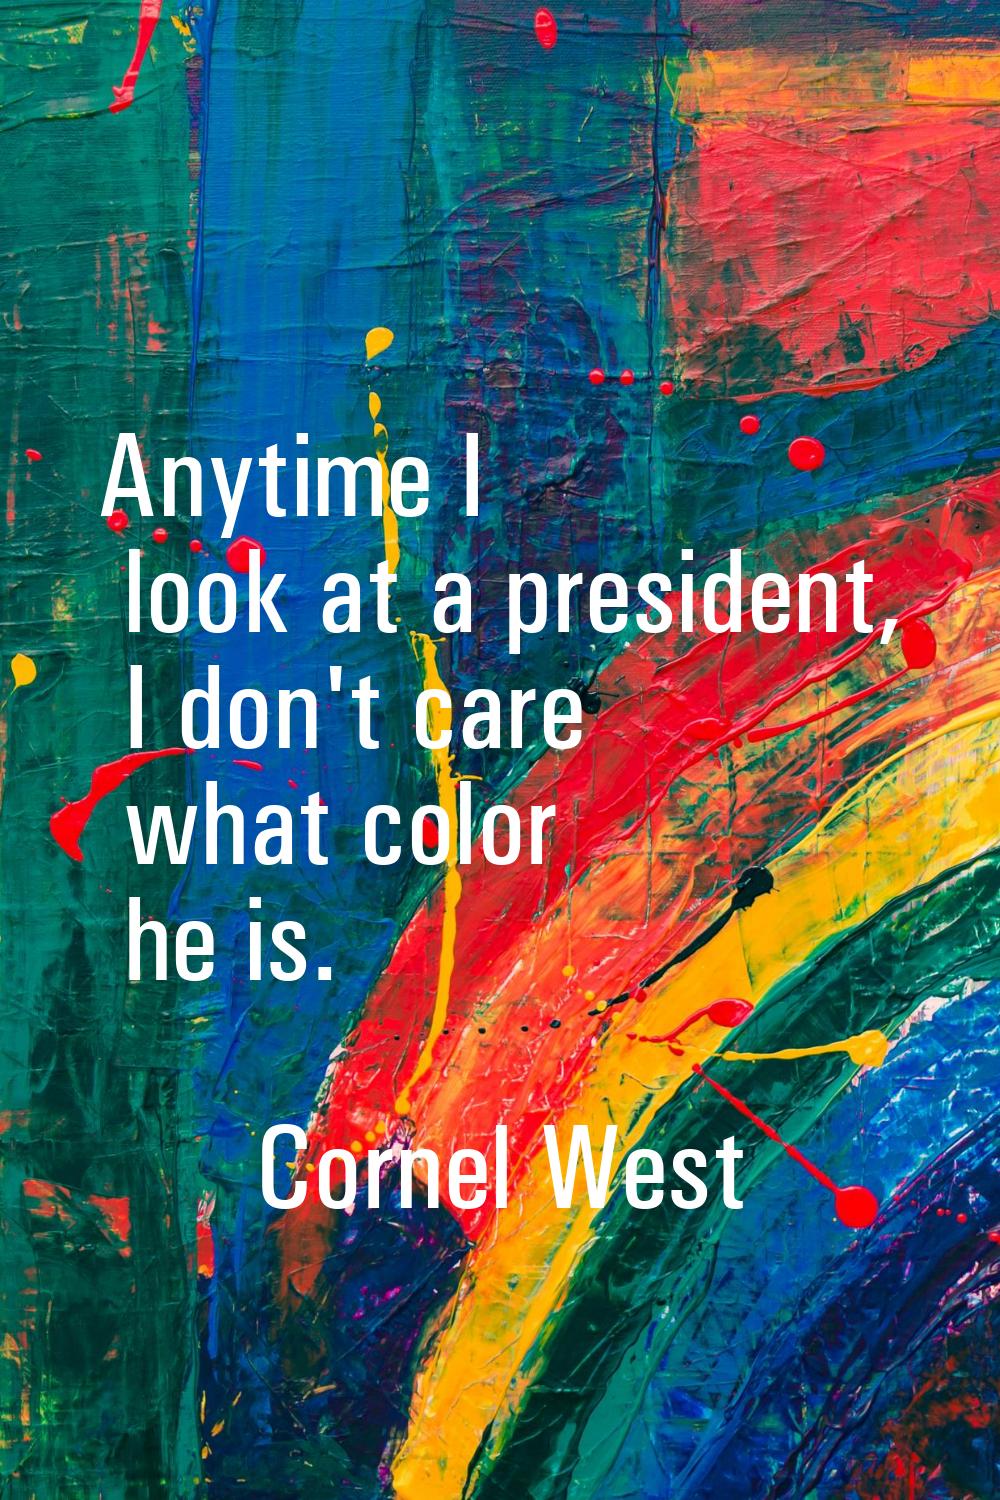 Anytime I look at a president, I don't care what color he is.